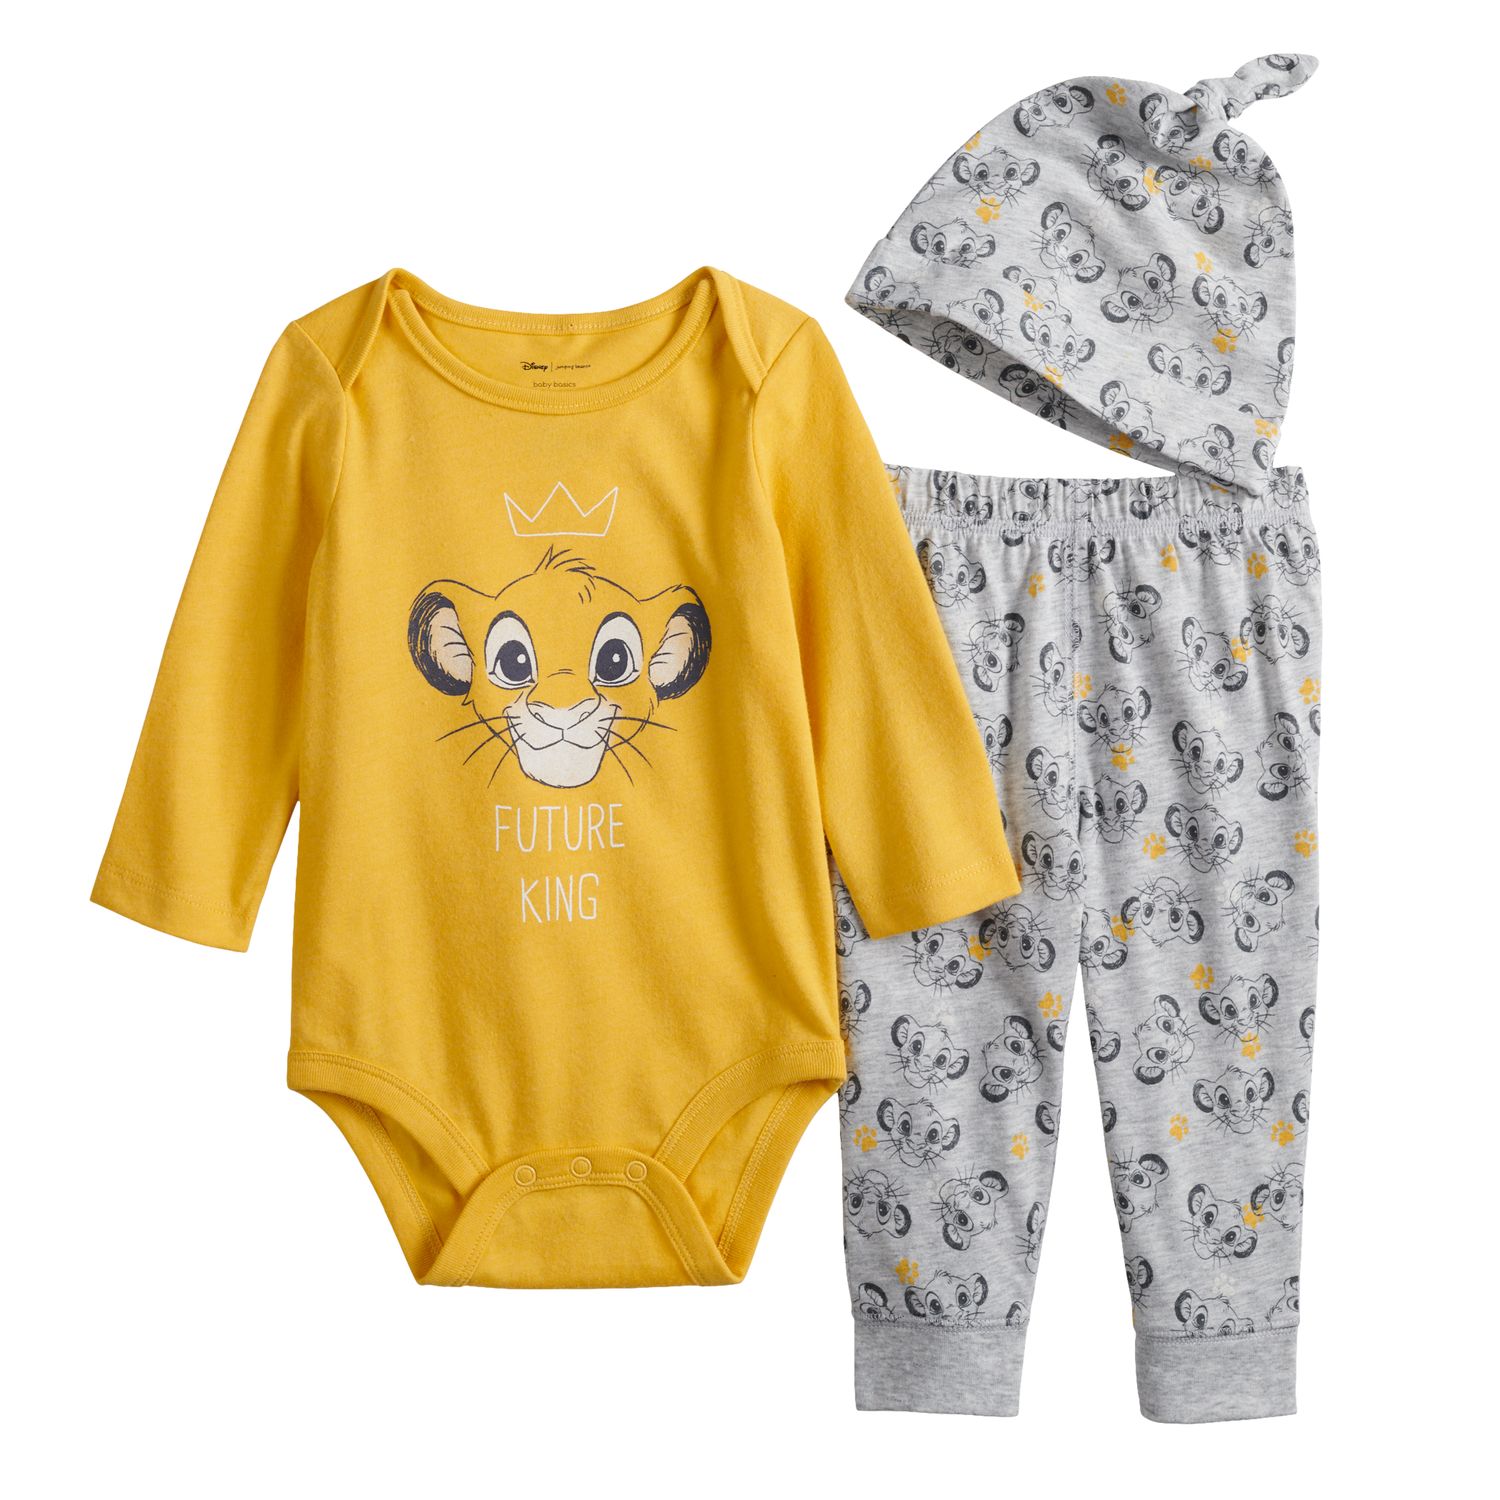 the lion king baby stuff